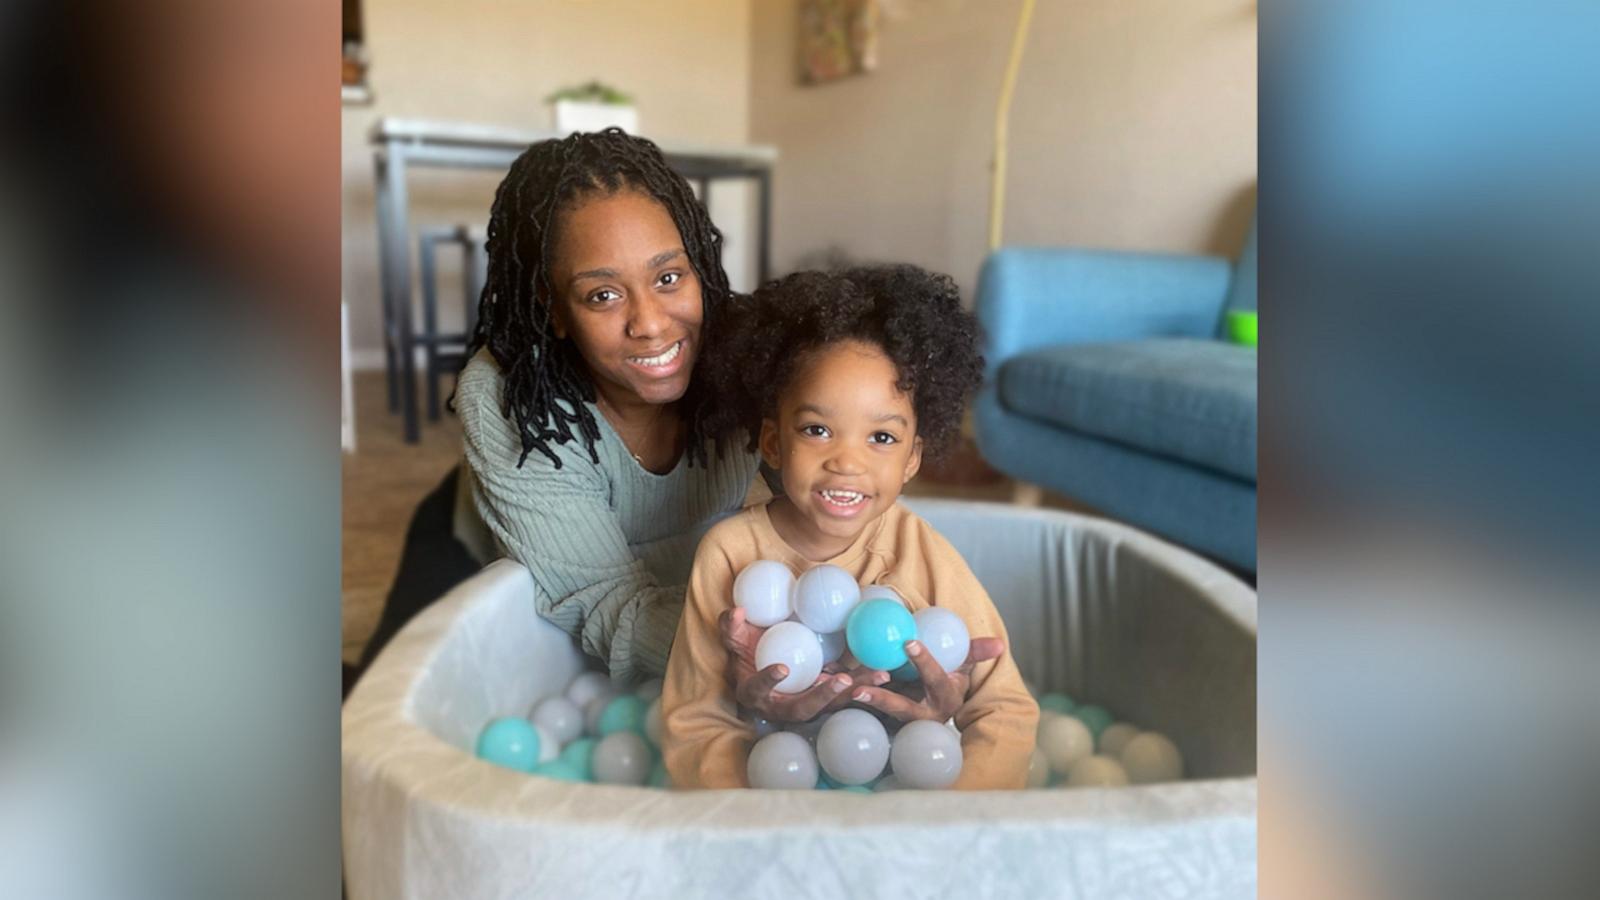 VIDEO: Mom shares hair routine with daughter to teach others about autism